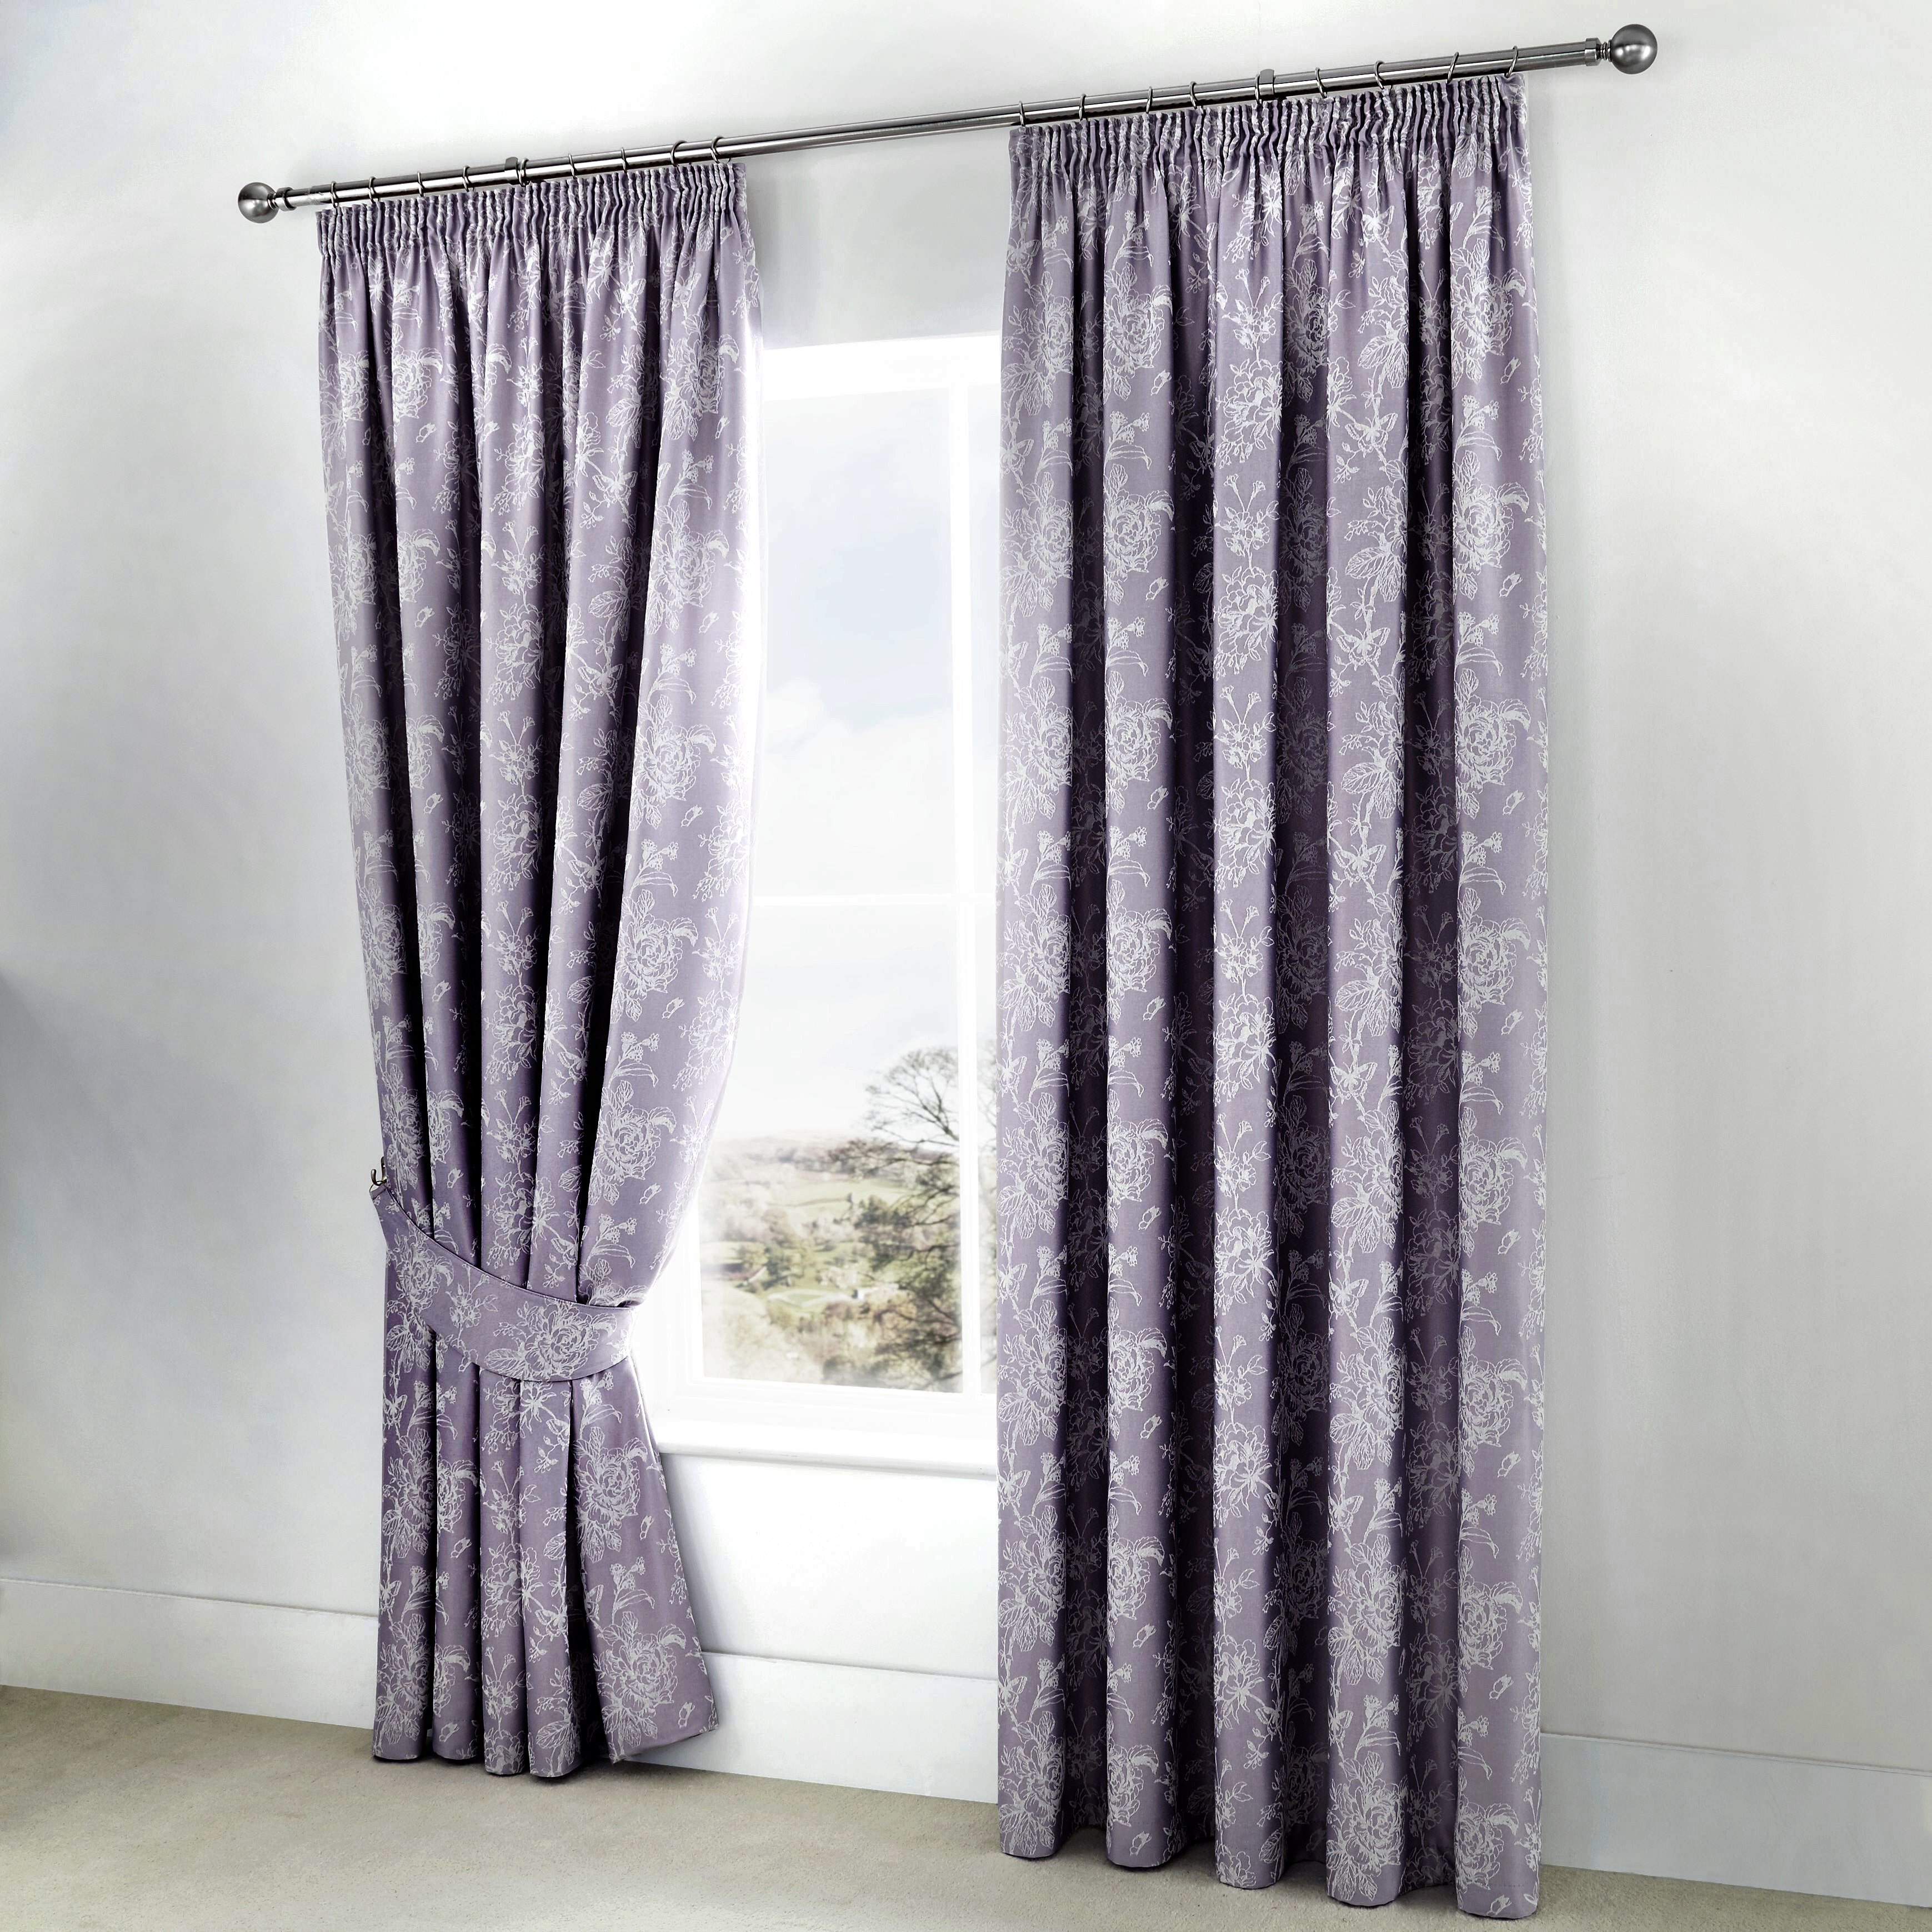 Jasmine - Damask Easy Care Bedding Set, Curtains & Cushions in Lavender - by D&D Woven